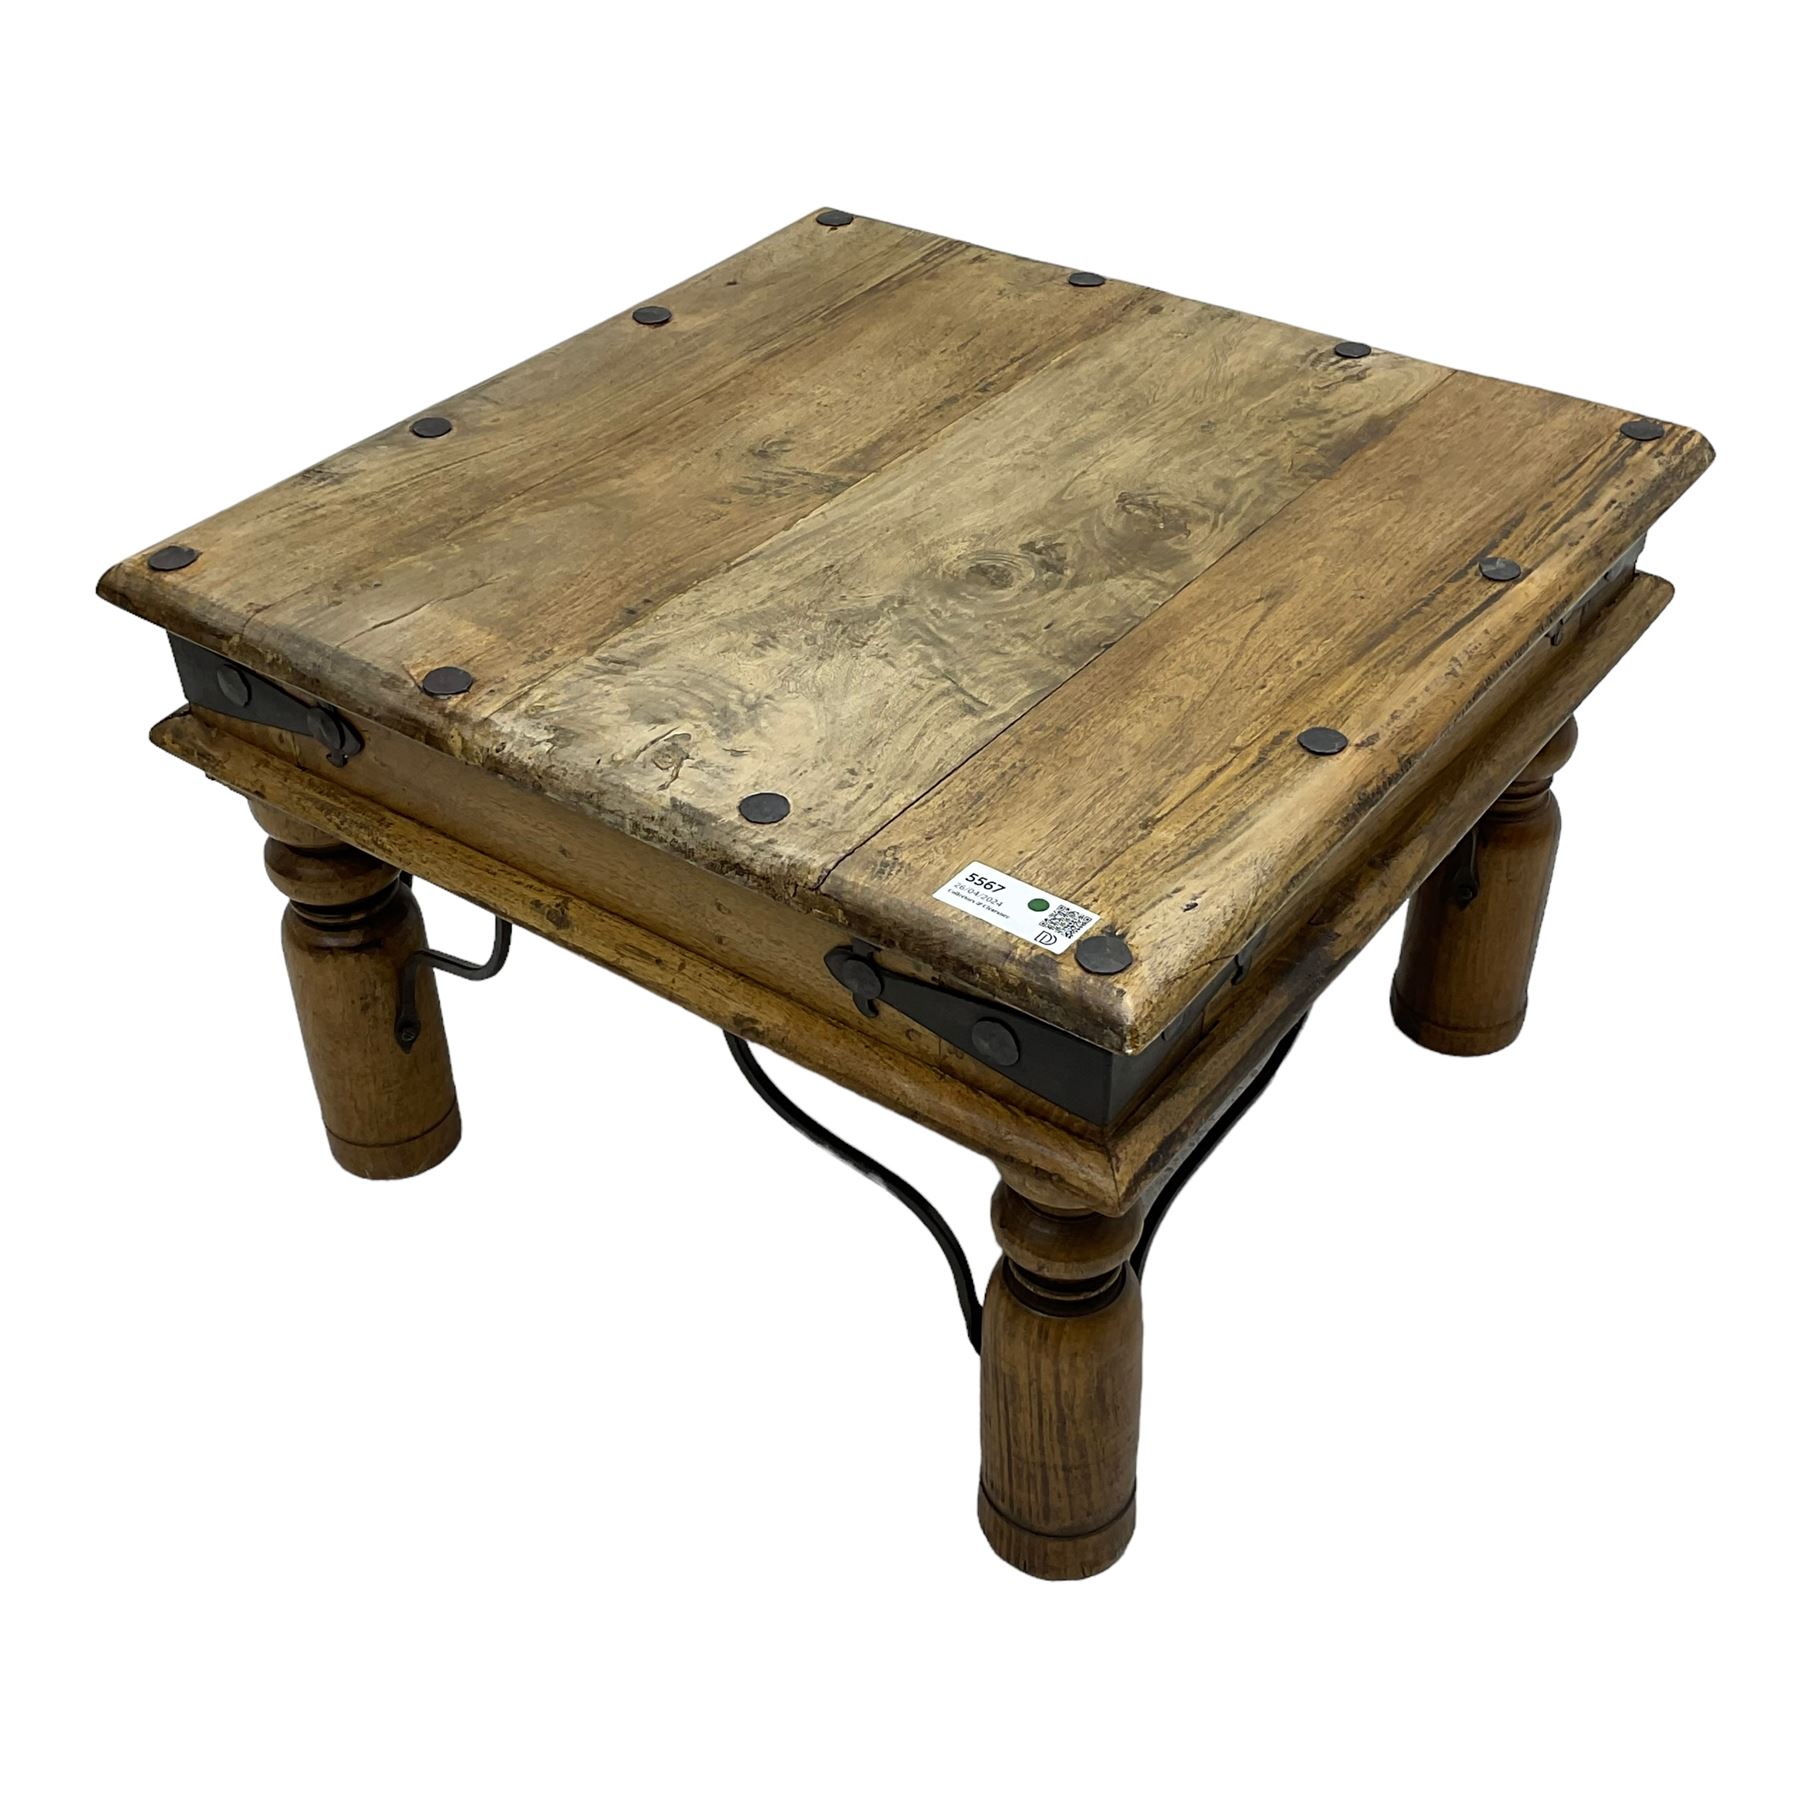 20th century Indian hardwood Thakat occasional table - Image 3 of 4